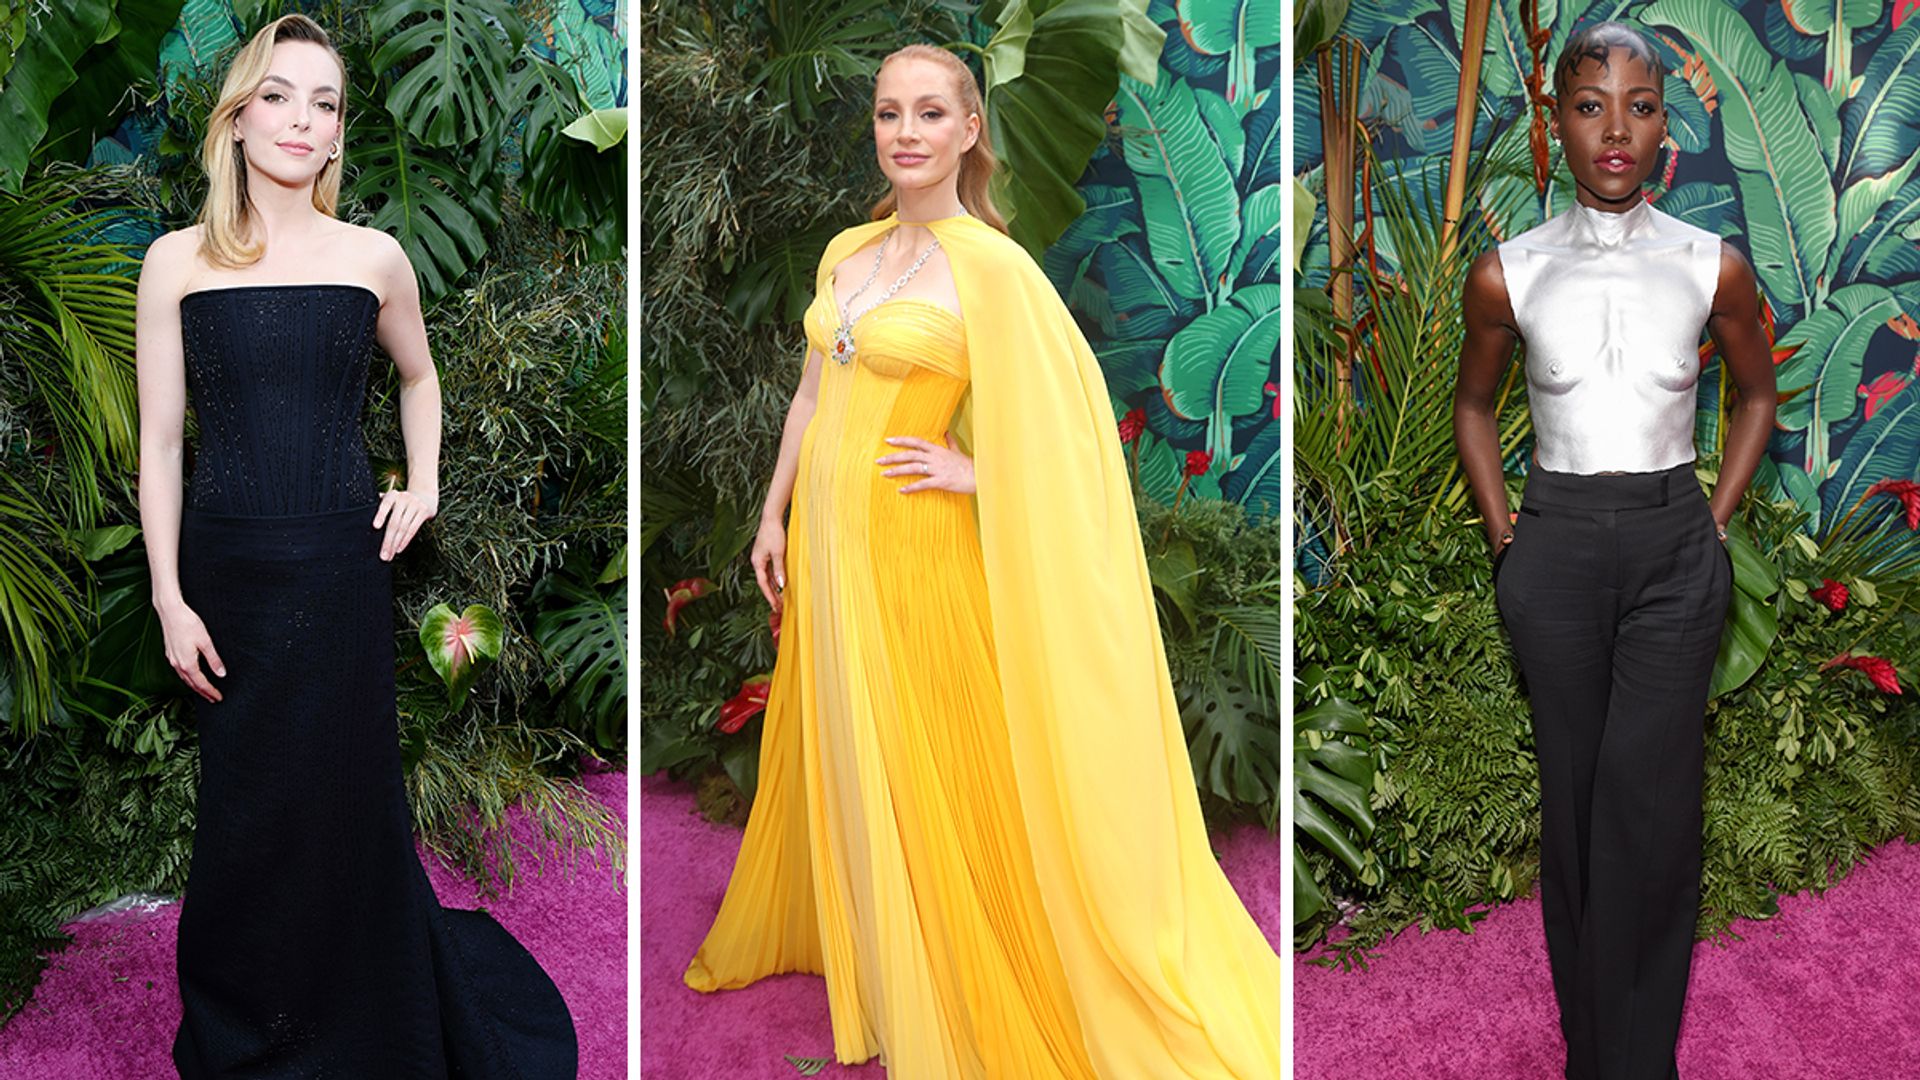 Jodie Comer, Jessica Chastain and Lupita Nyong'o on the red carpet at the Tony Awards 